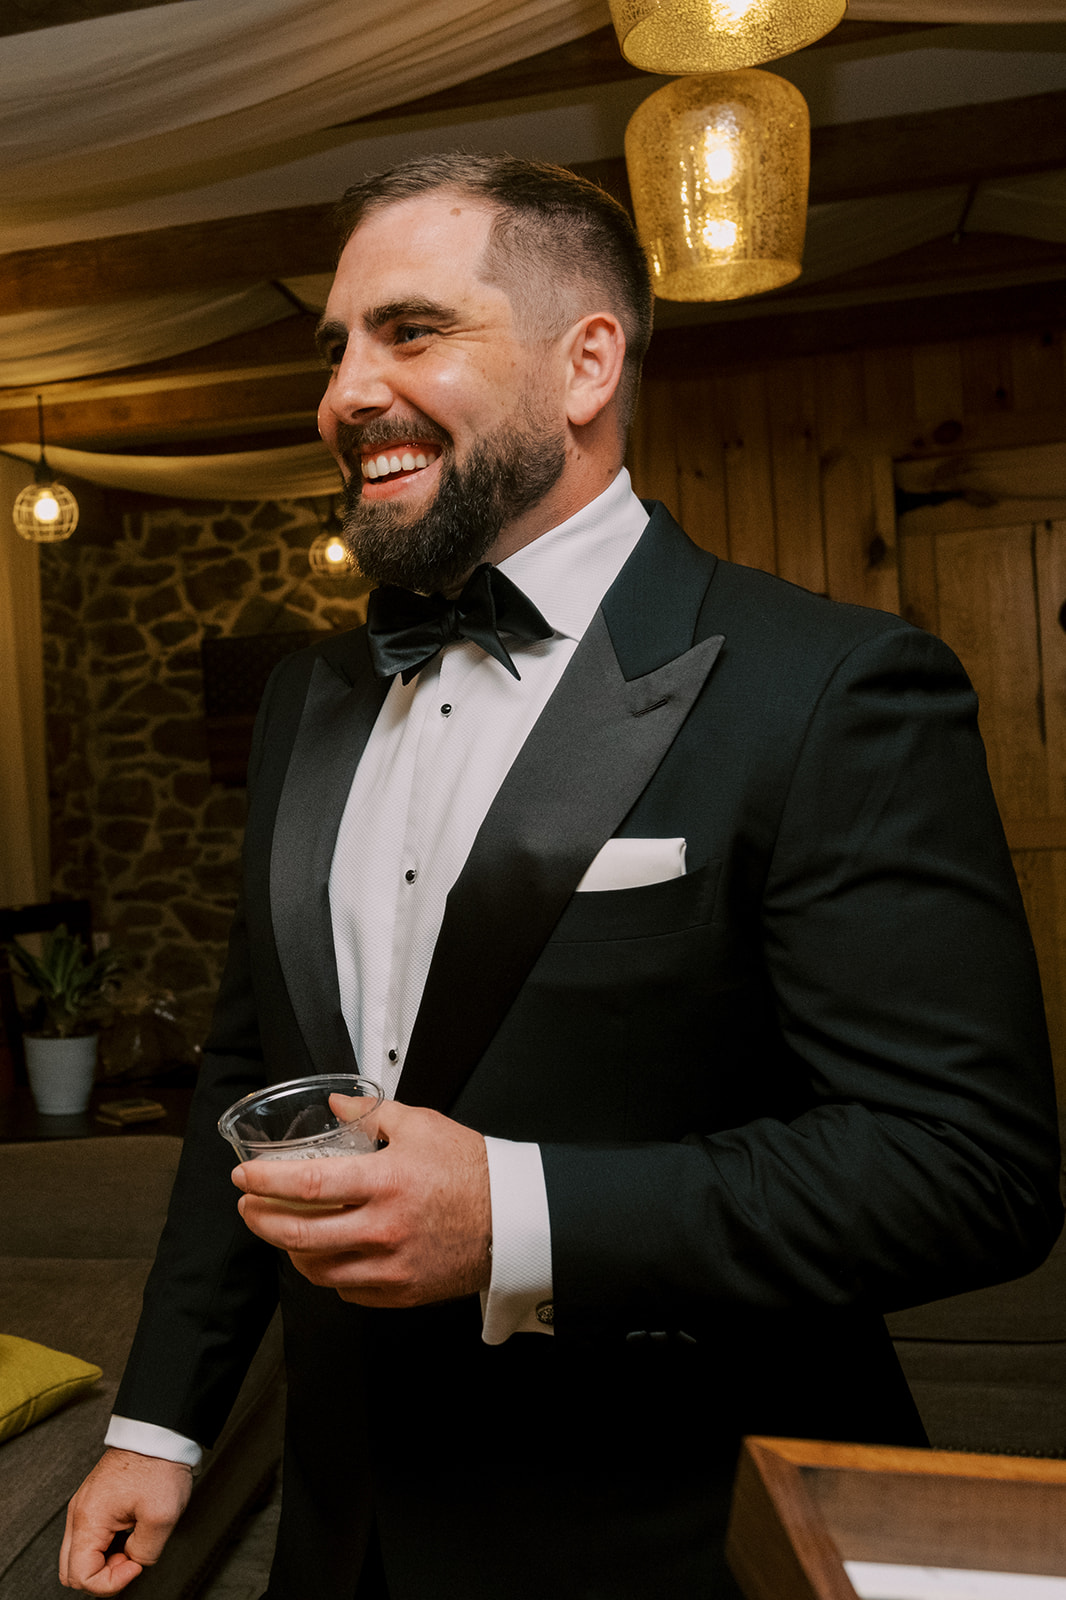 Groom smiles with drink in hand while getting ready at Virginia wedding